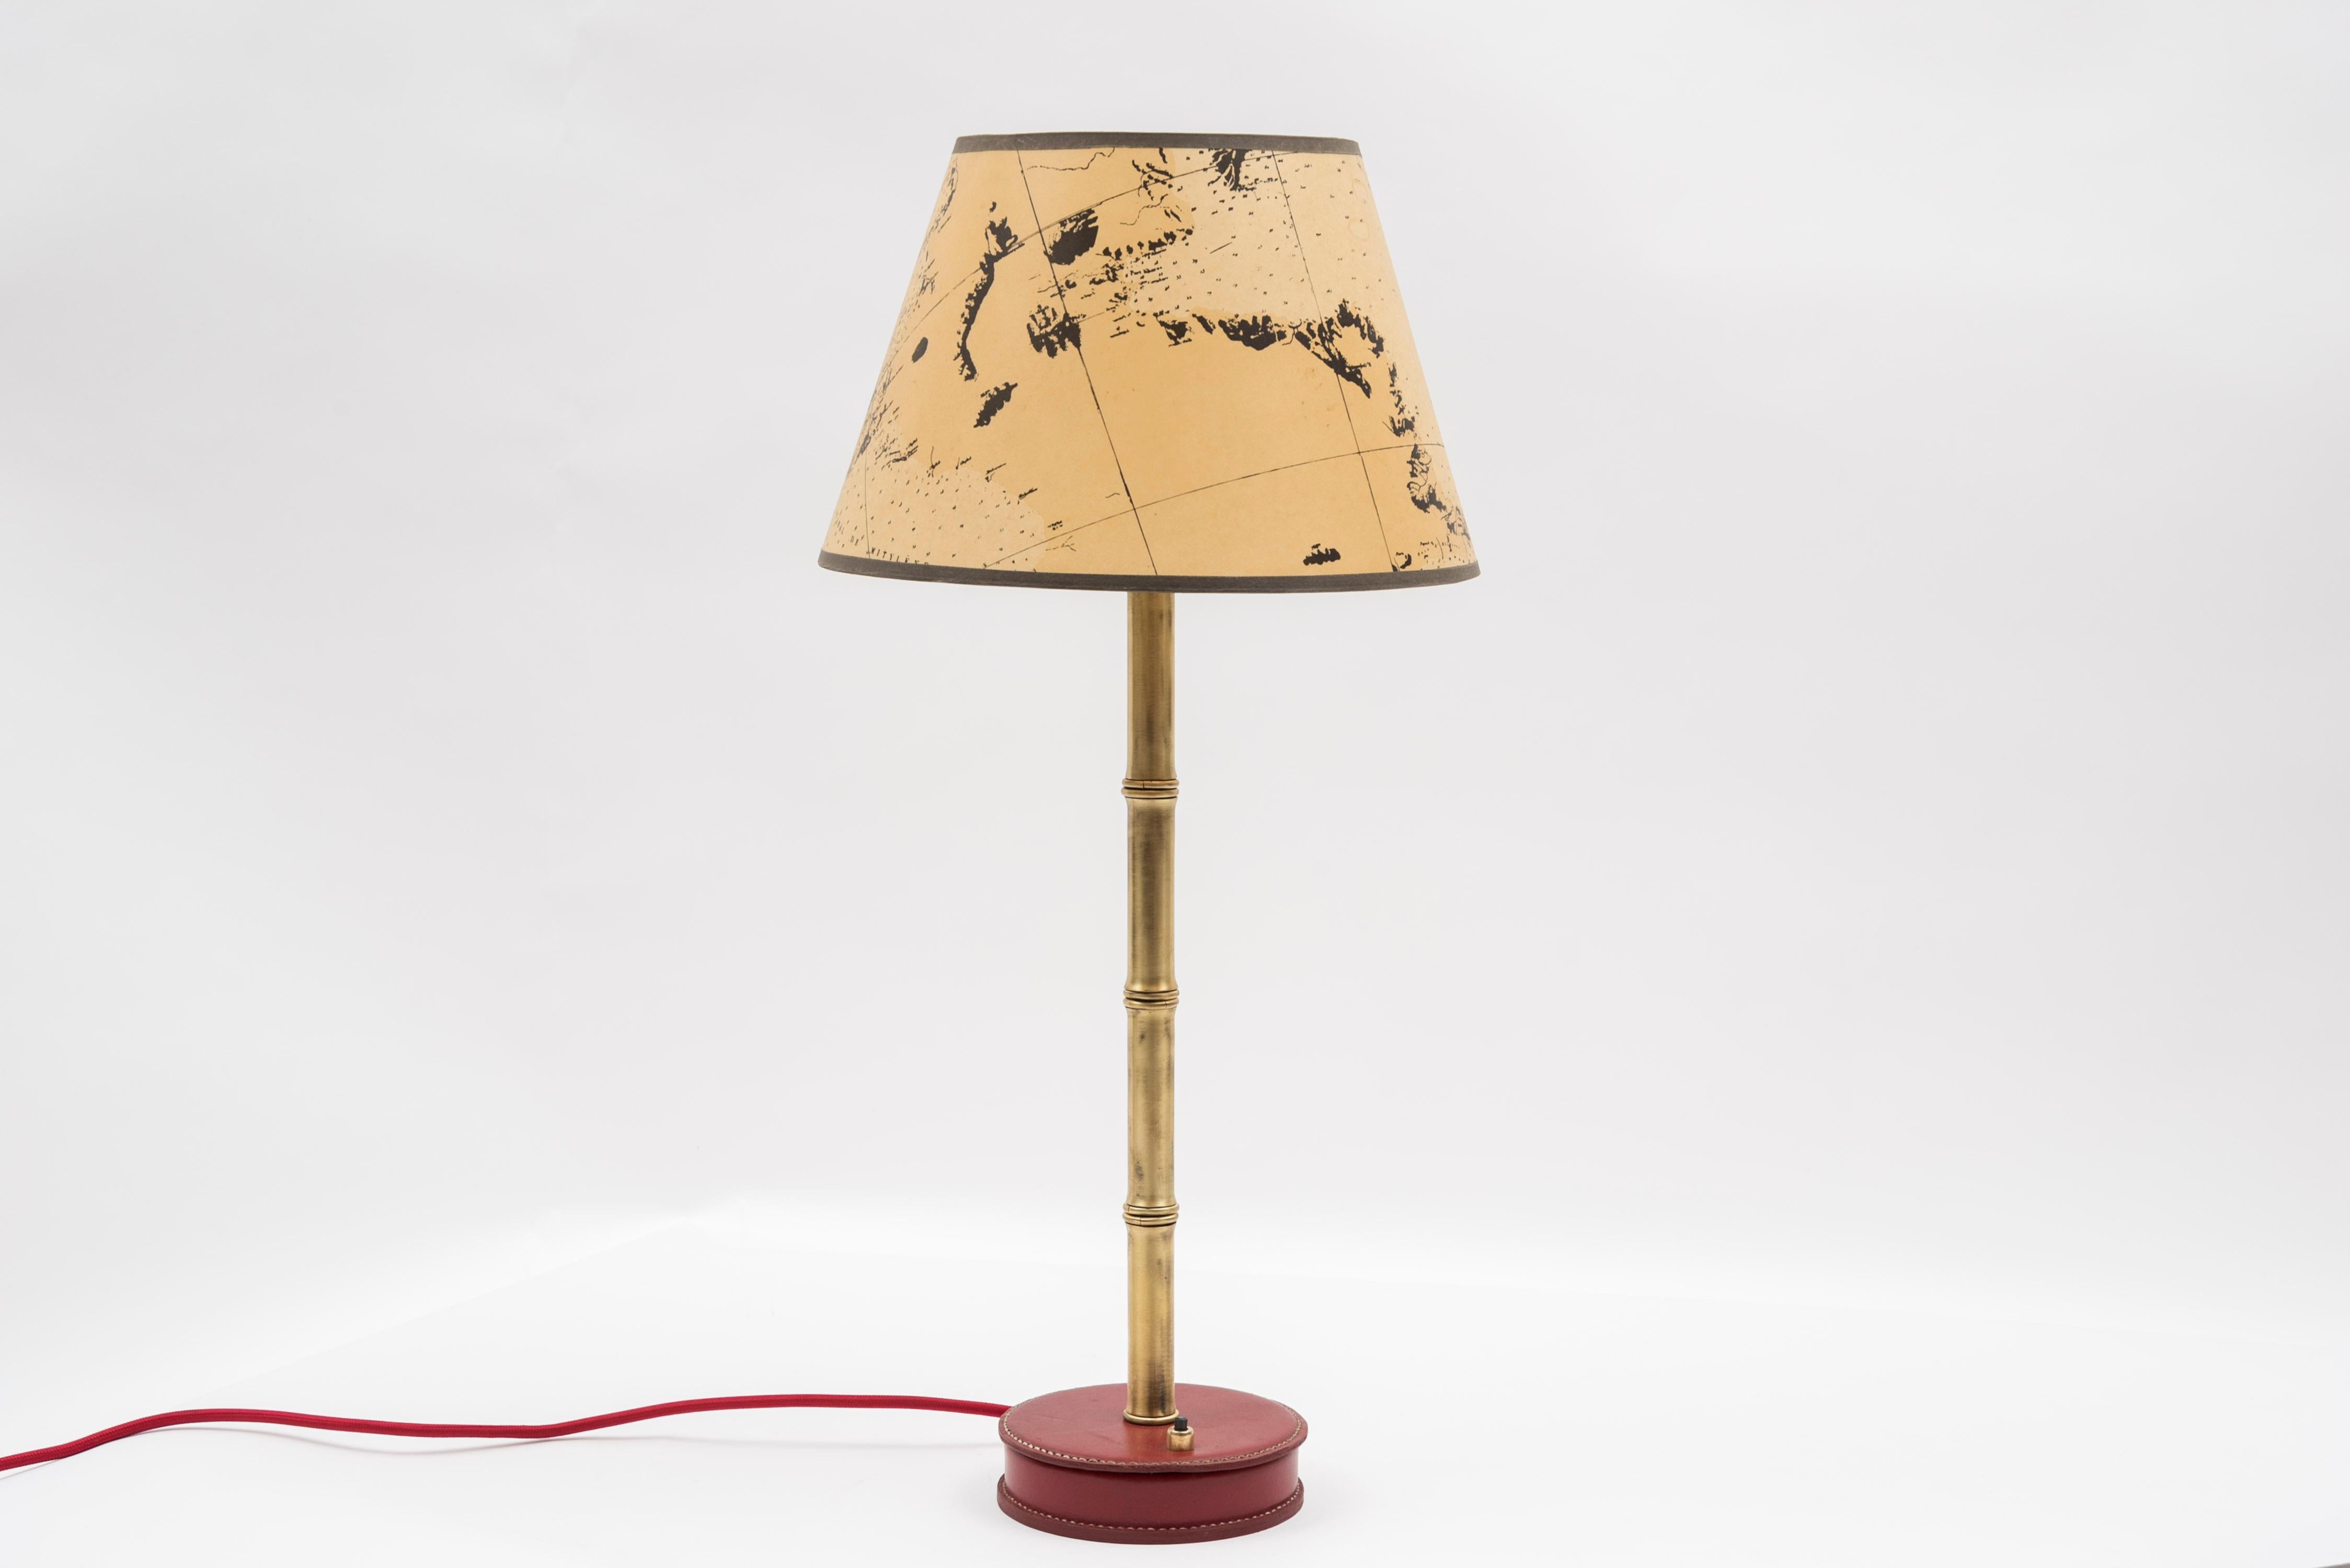 European Pair of Stitched Leather Lamps by Jacques Adnet